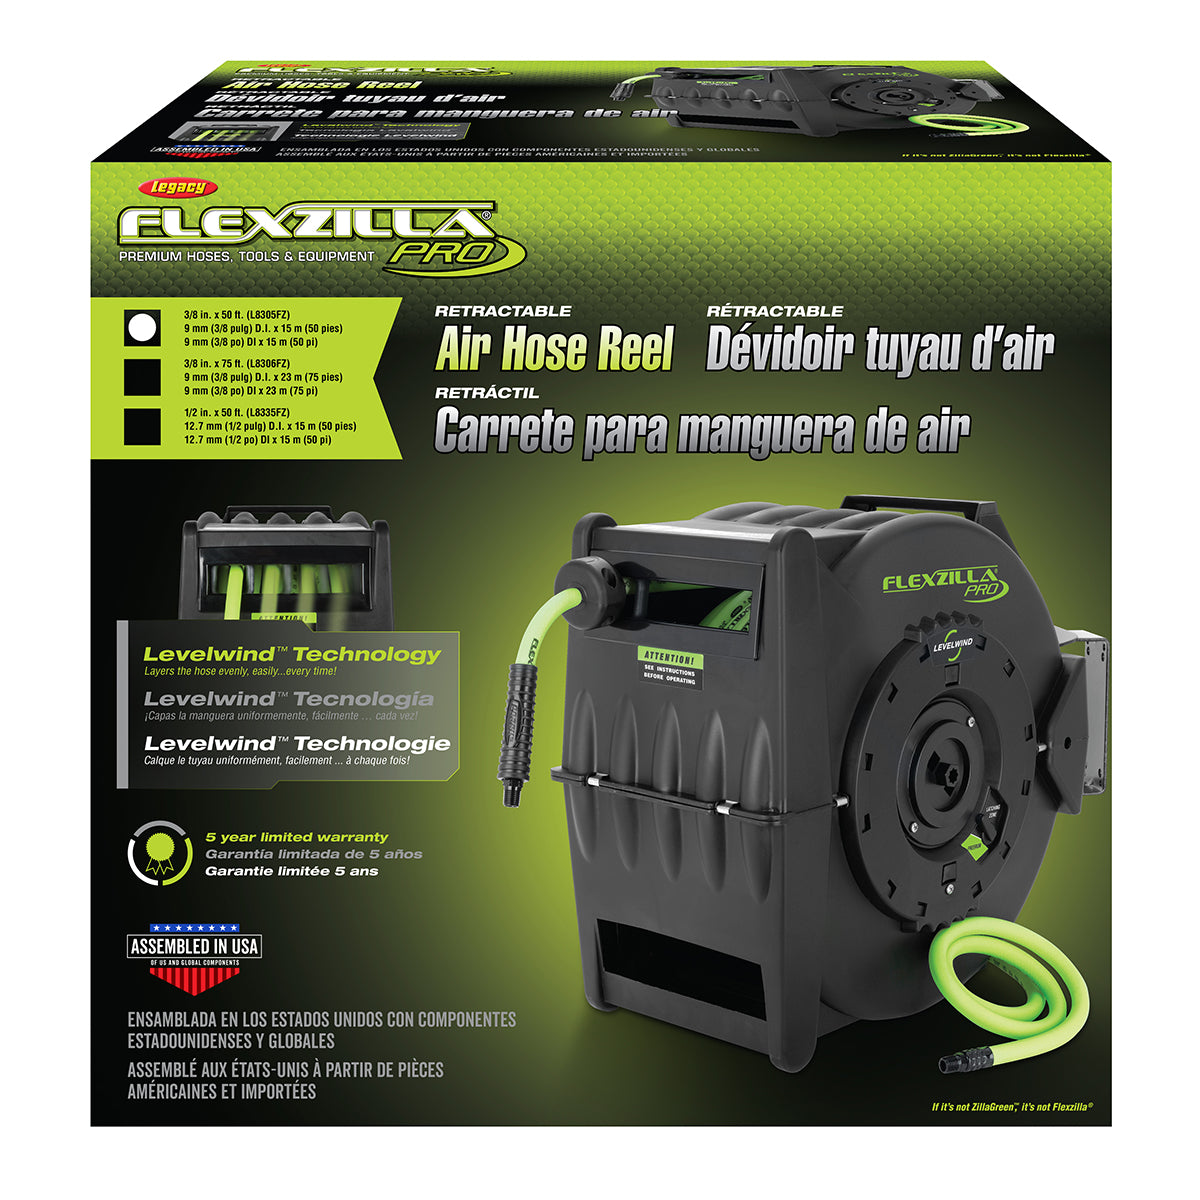 Flexzilla® Pro Retractable Air Hose Reel with Levelwind Technology， 3/8